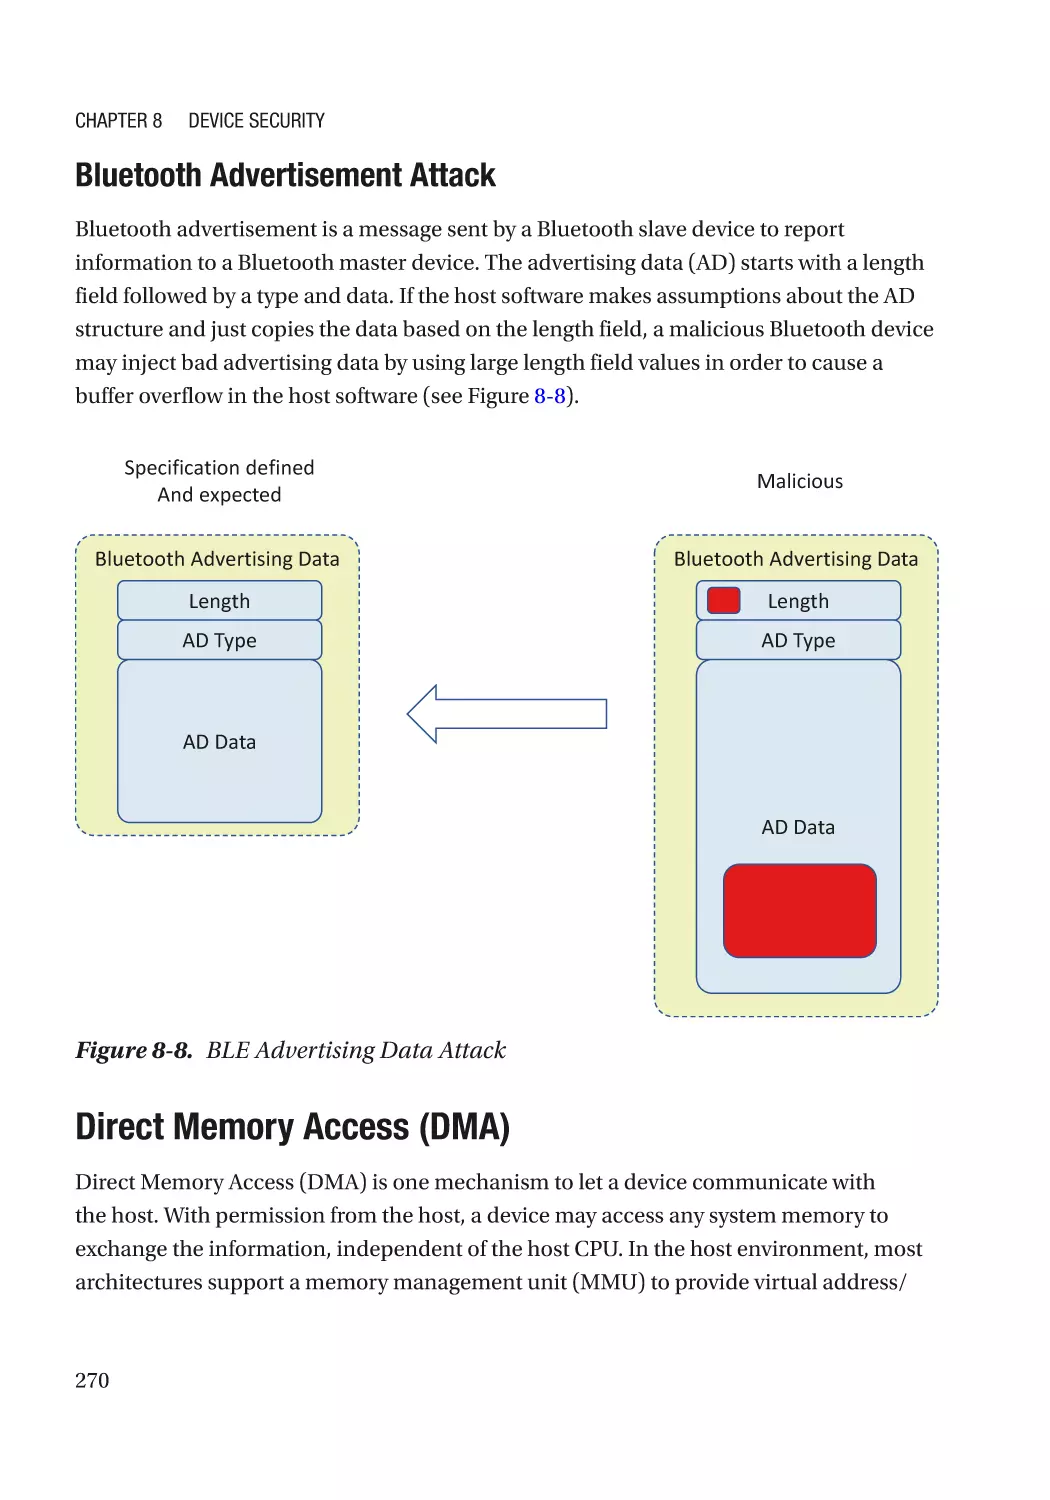 Bluetooth Advertisement Attack
Direct Memory Access (DMA)